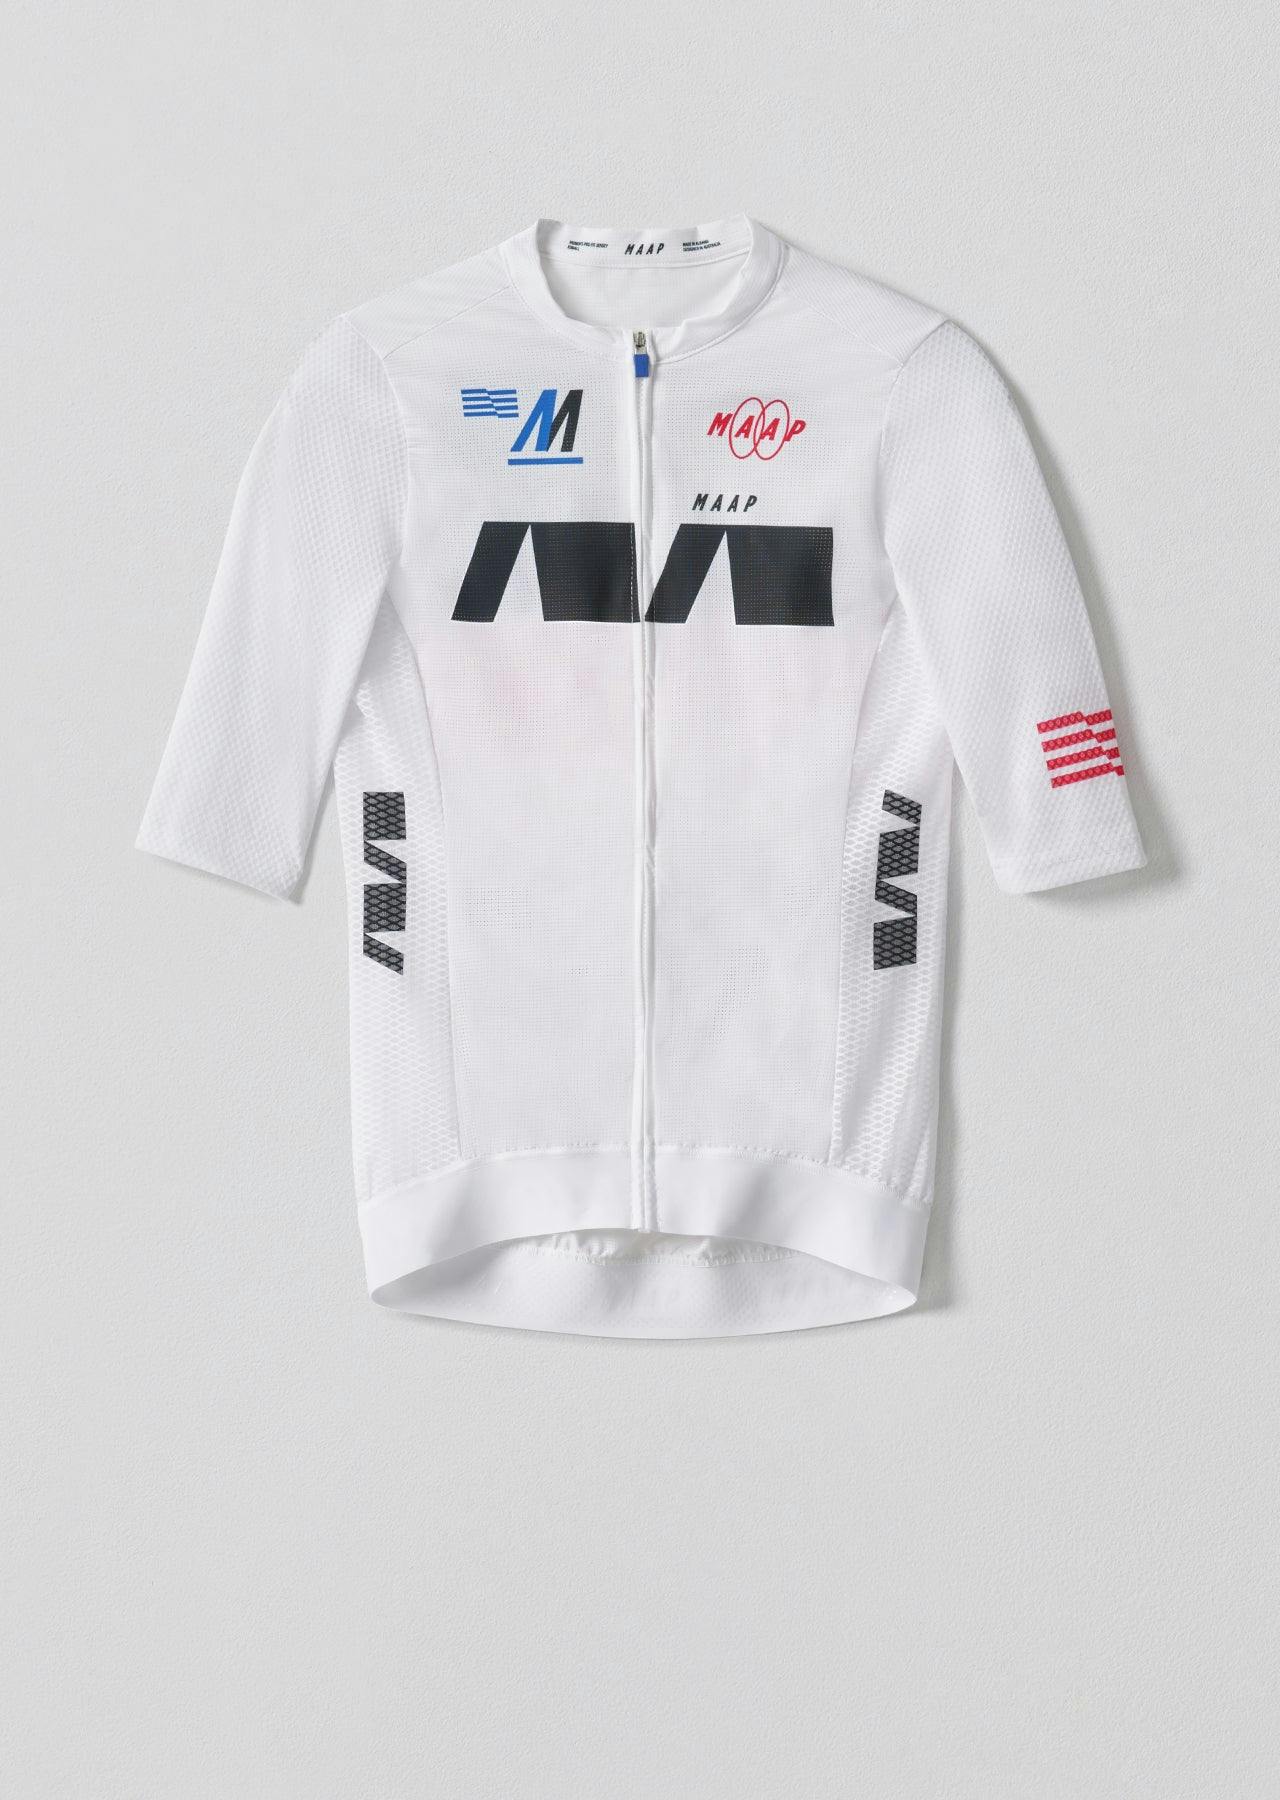 Women's Trace Pro Air Jersey